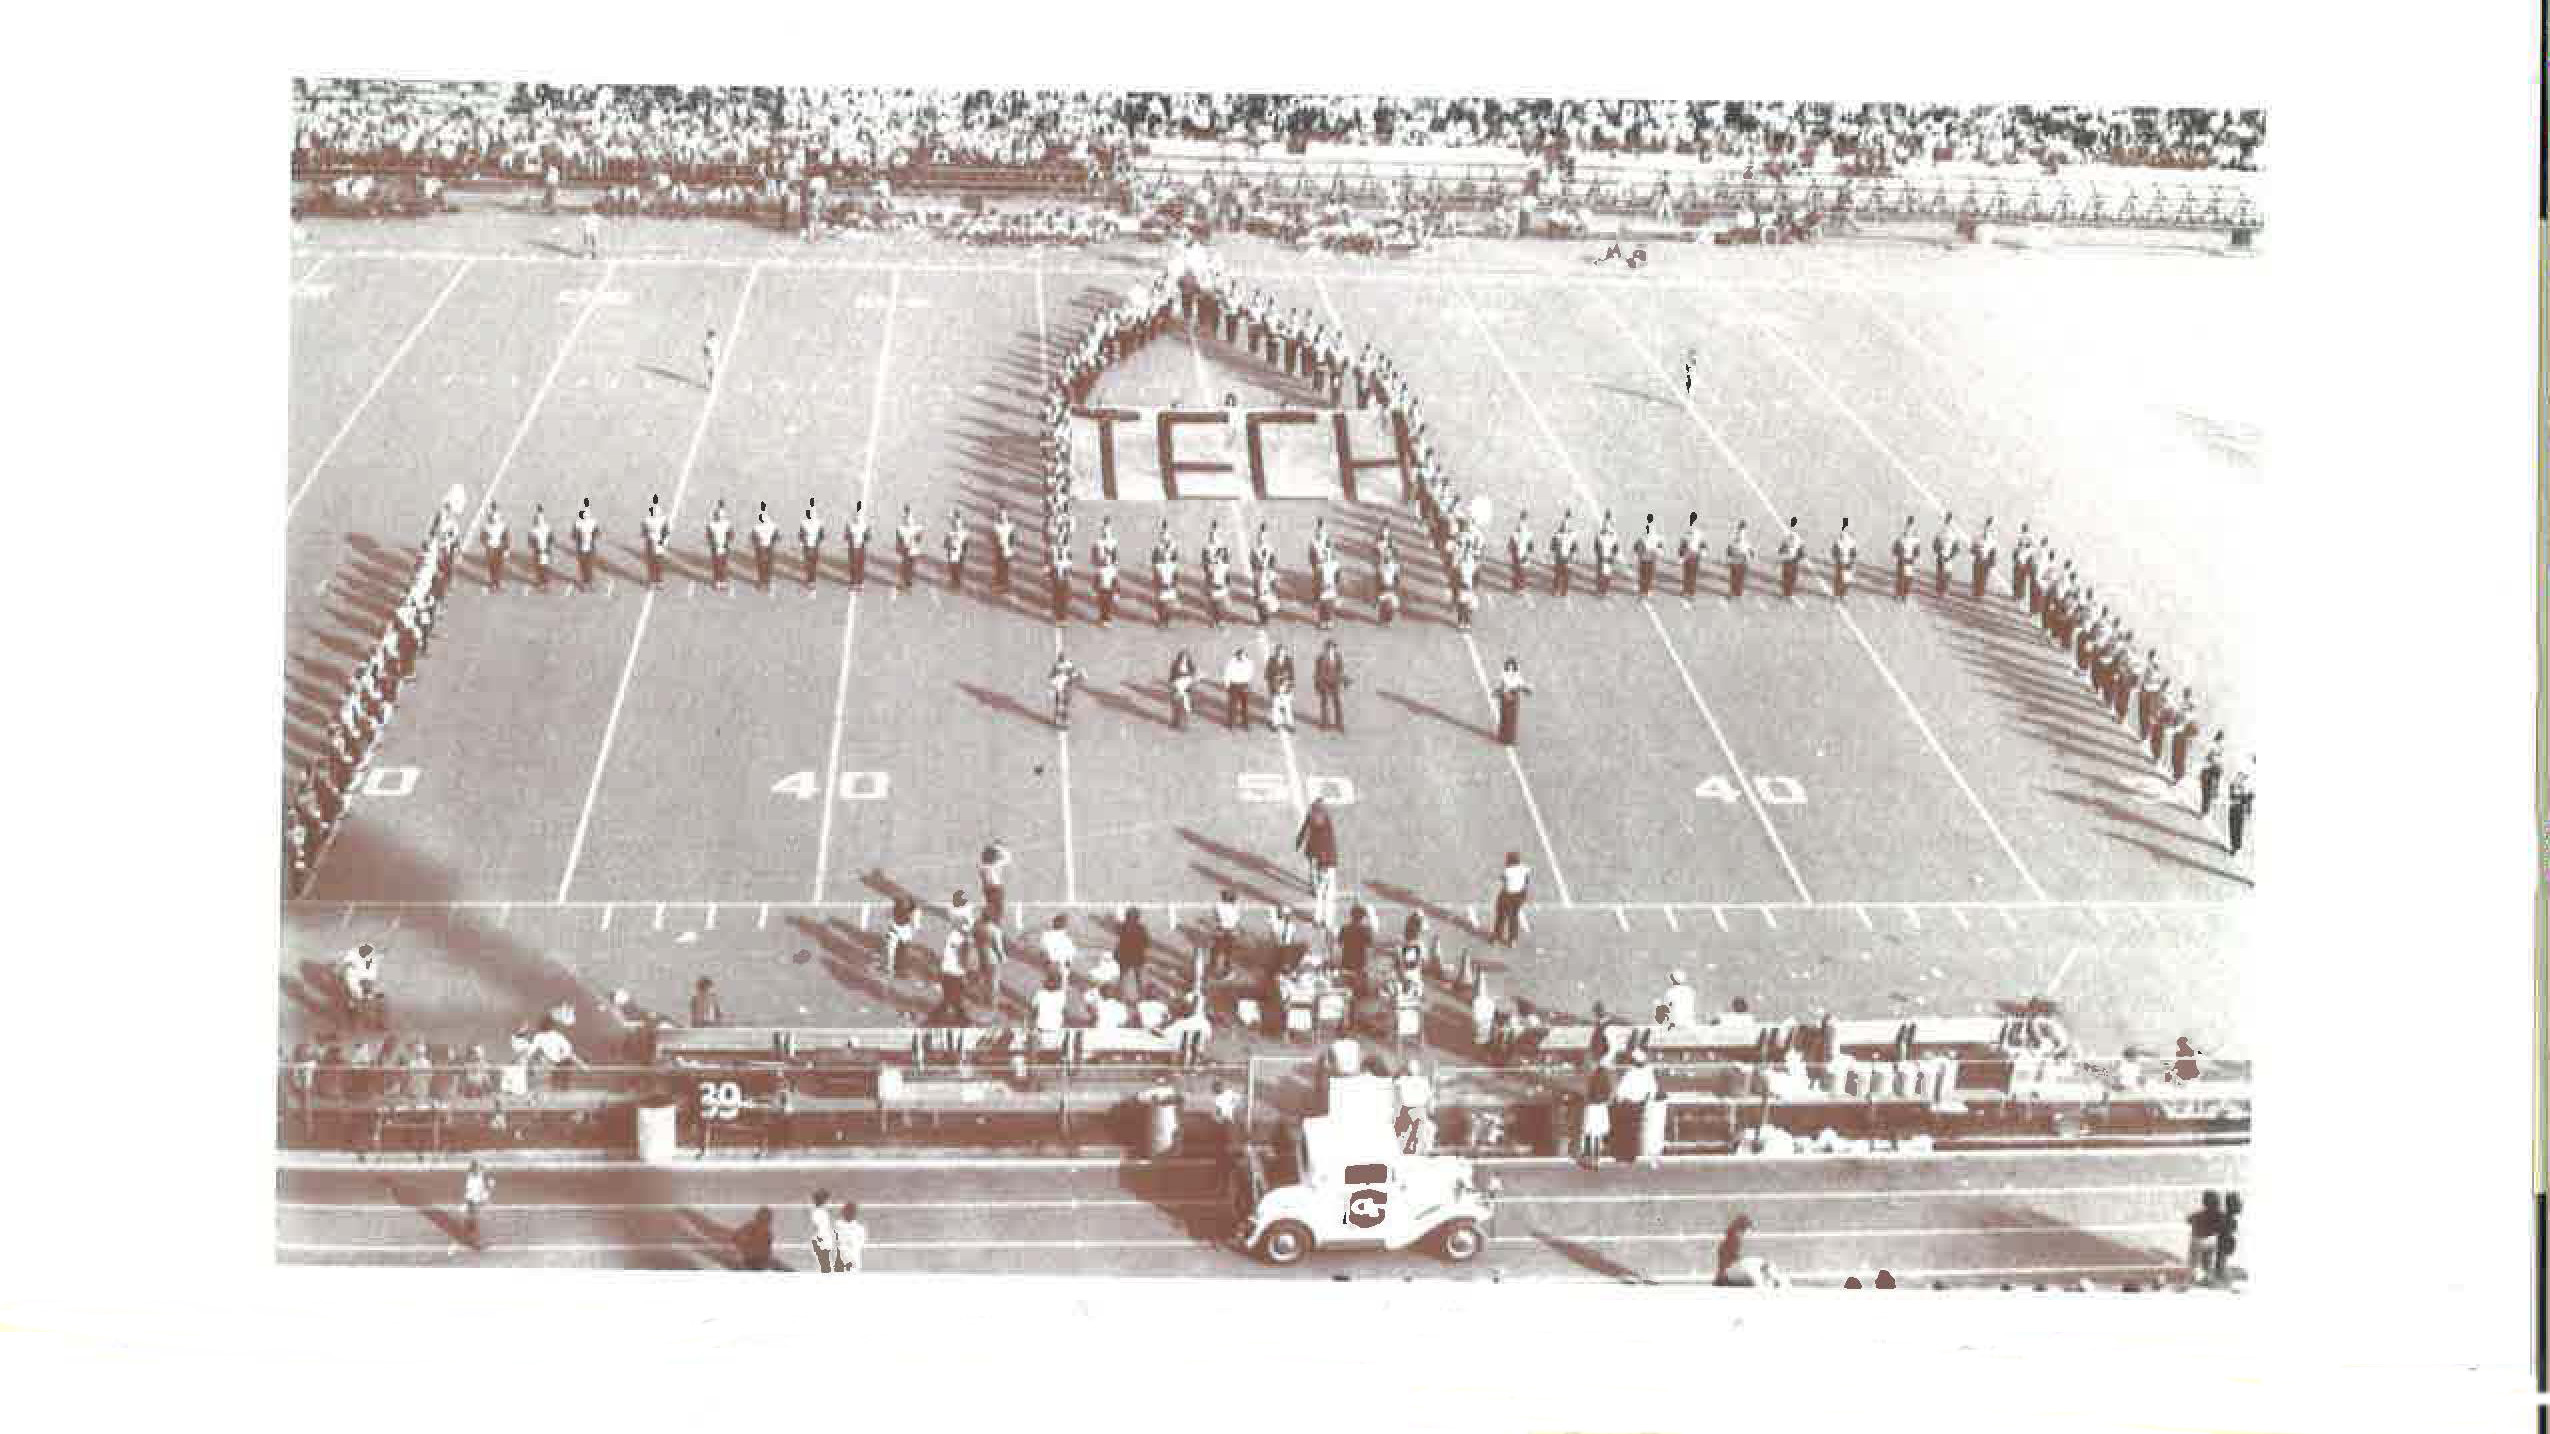 A shot of the Marching Band on the field of Bobby Dodd stadium in the 1970s.